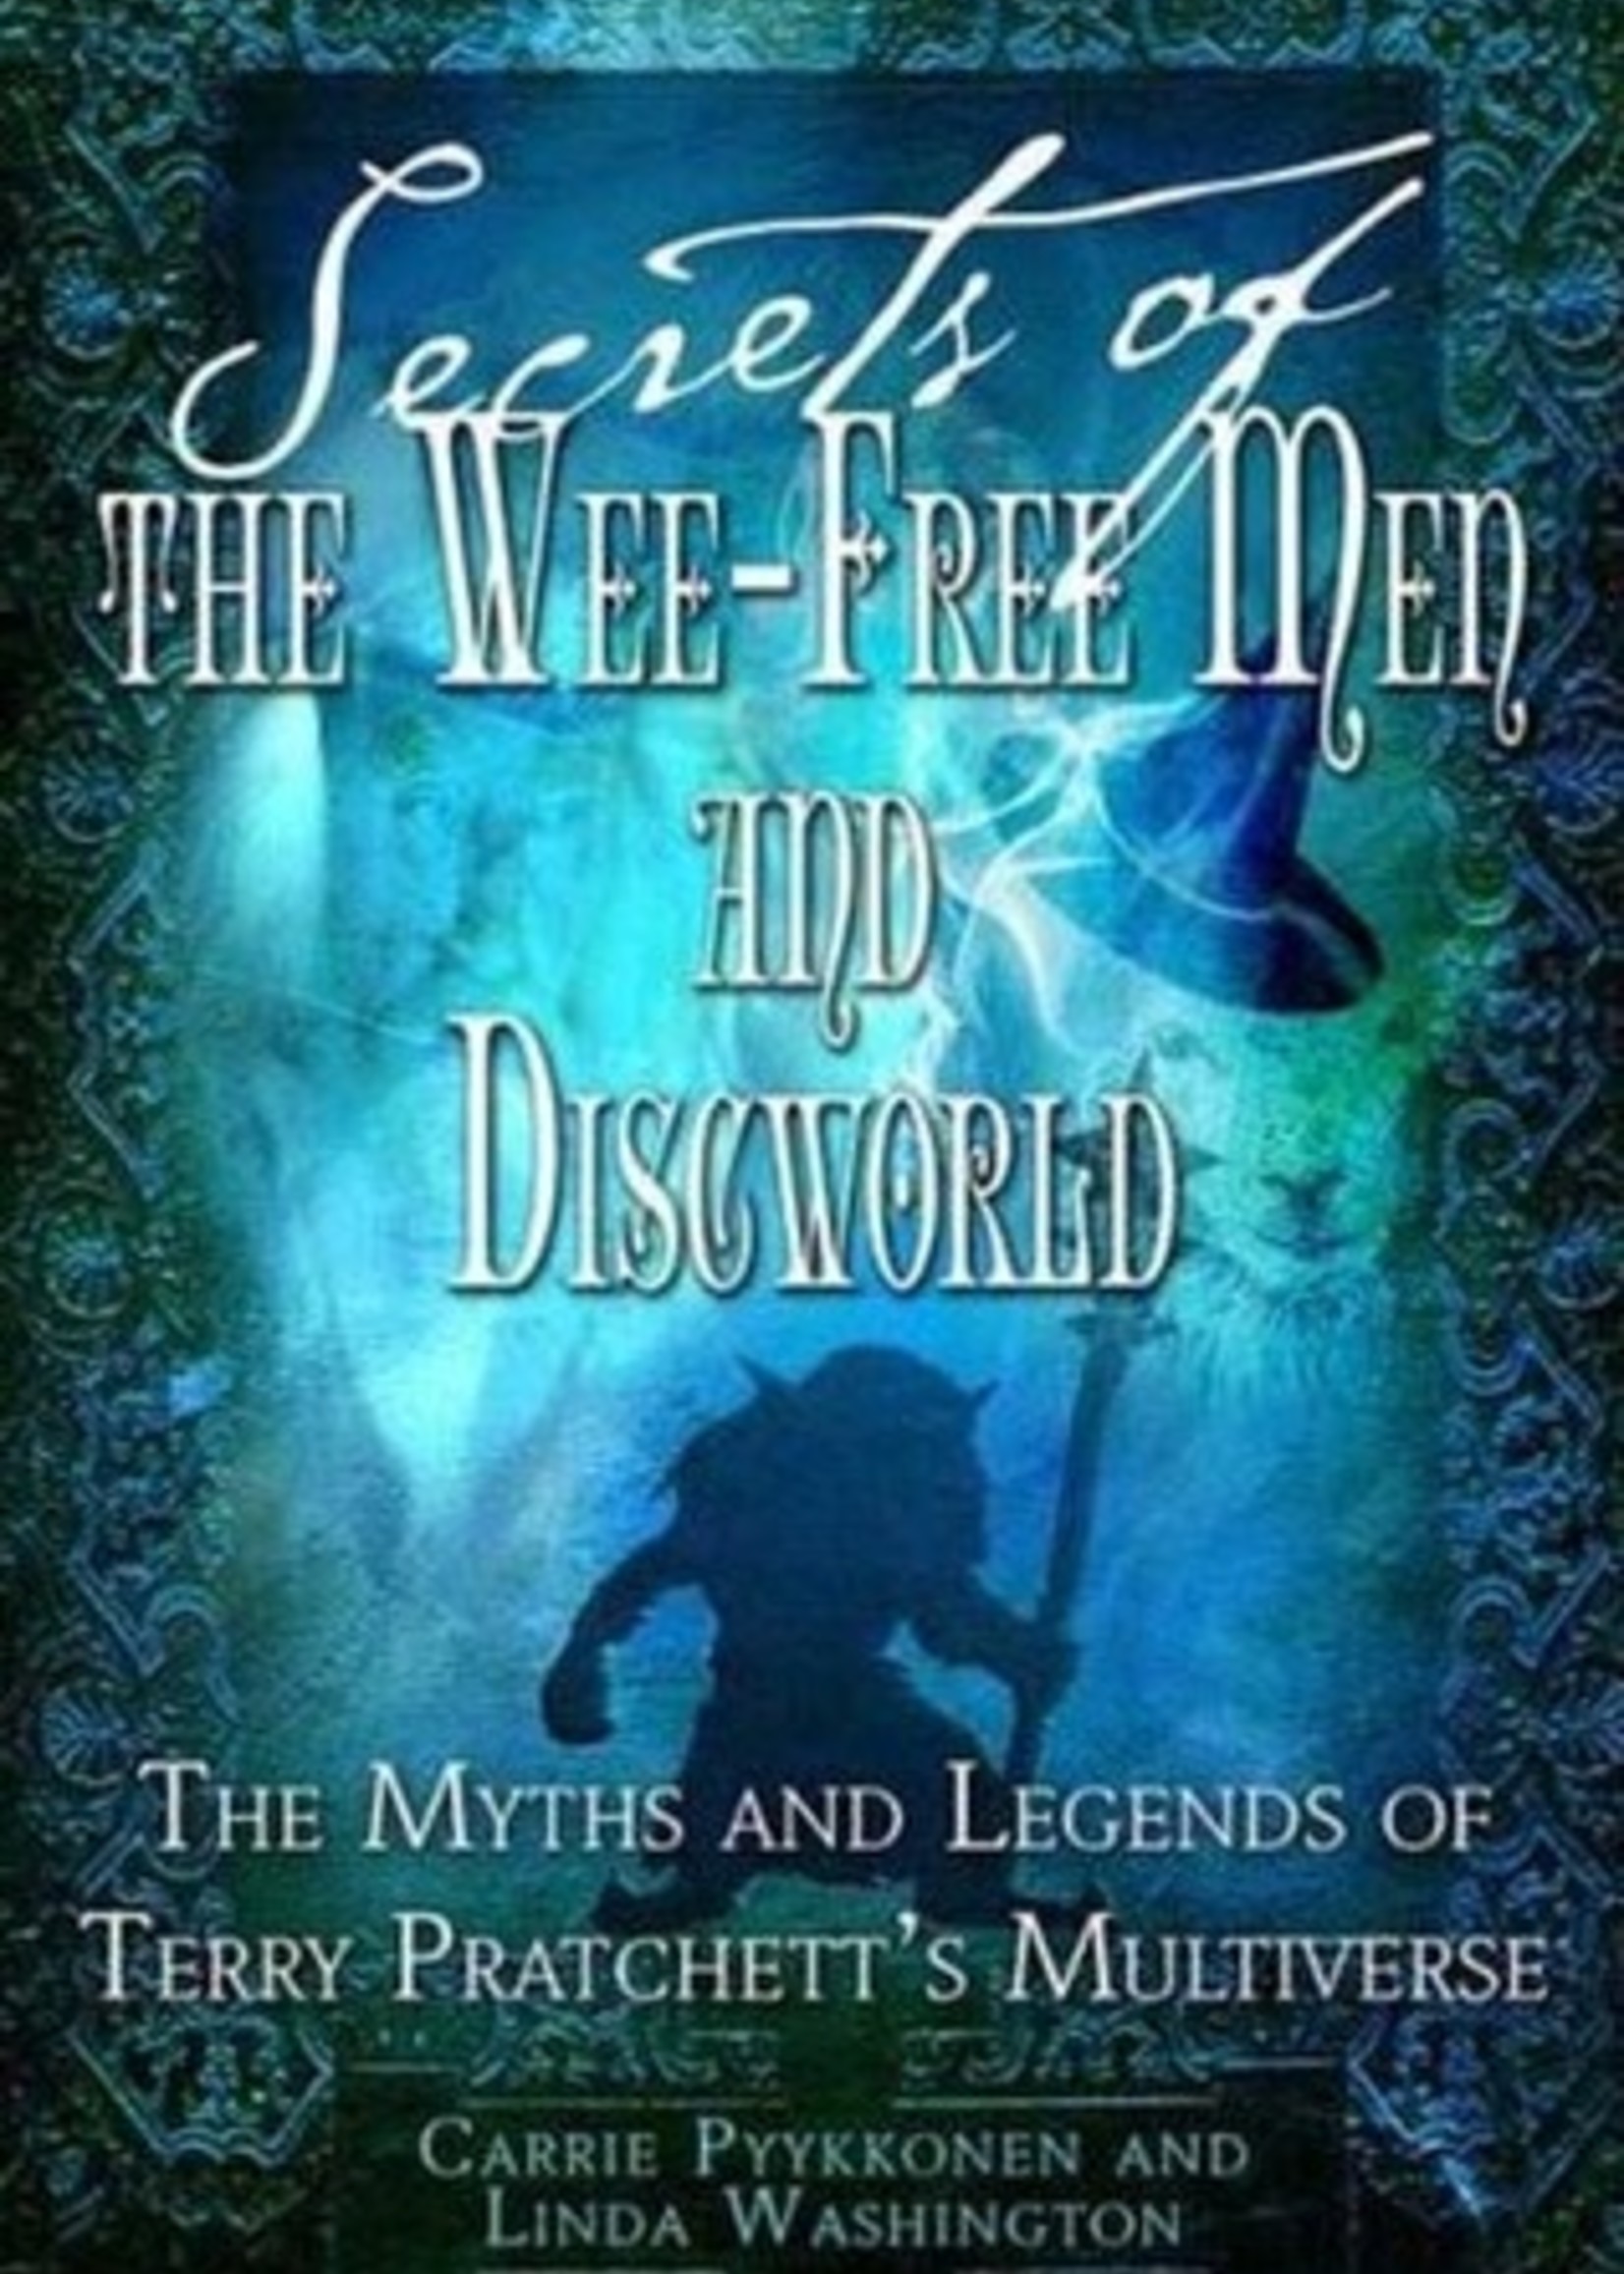 Secrets of The Wee Free Men and Discworld: The Myths and Legends of Terry Pratchett's Multiverse by Linda Washington, Carrie Pyykkonen